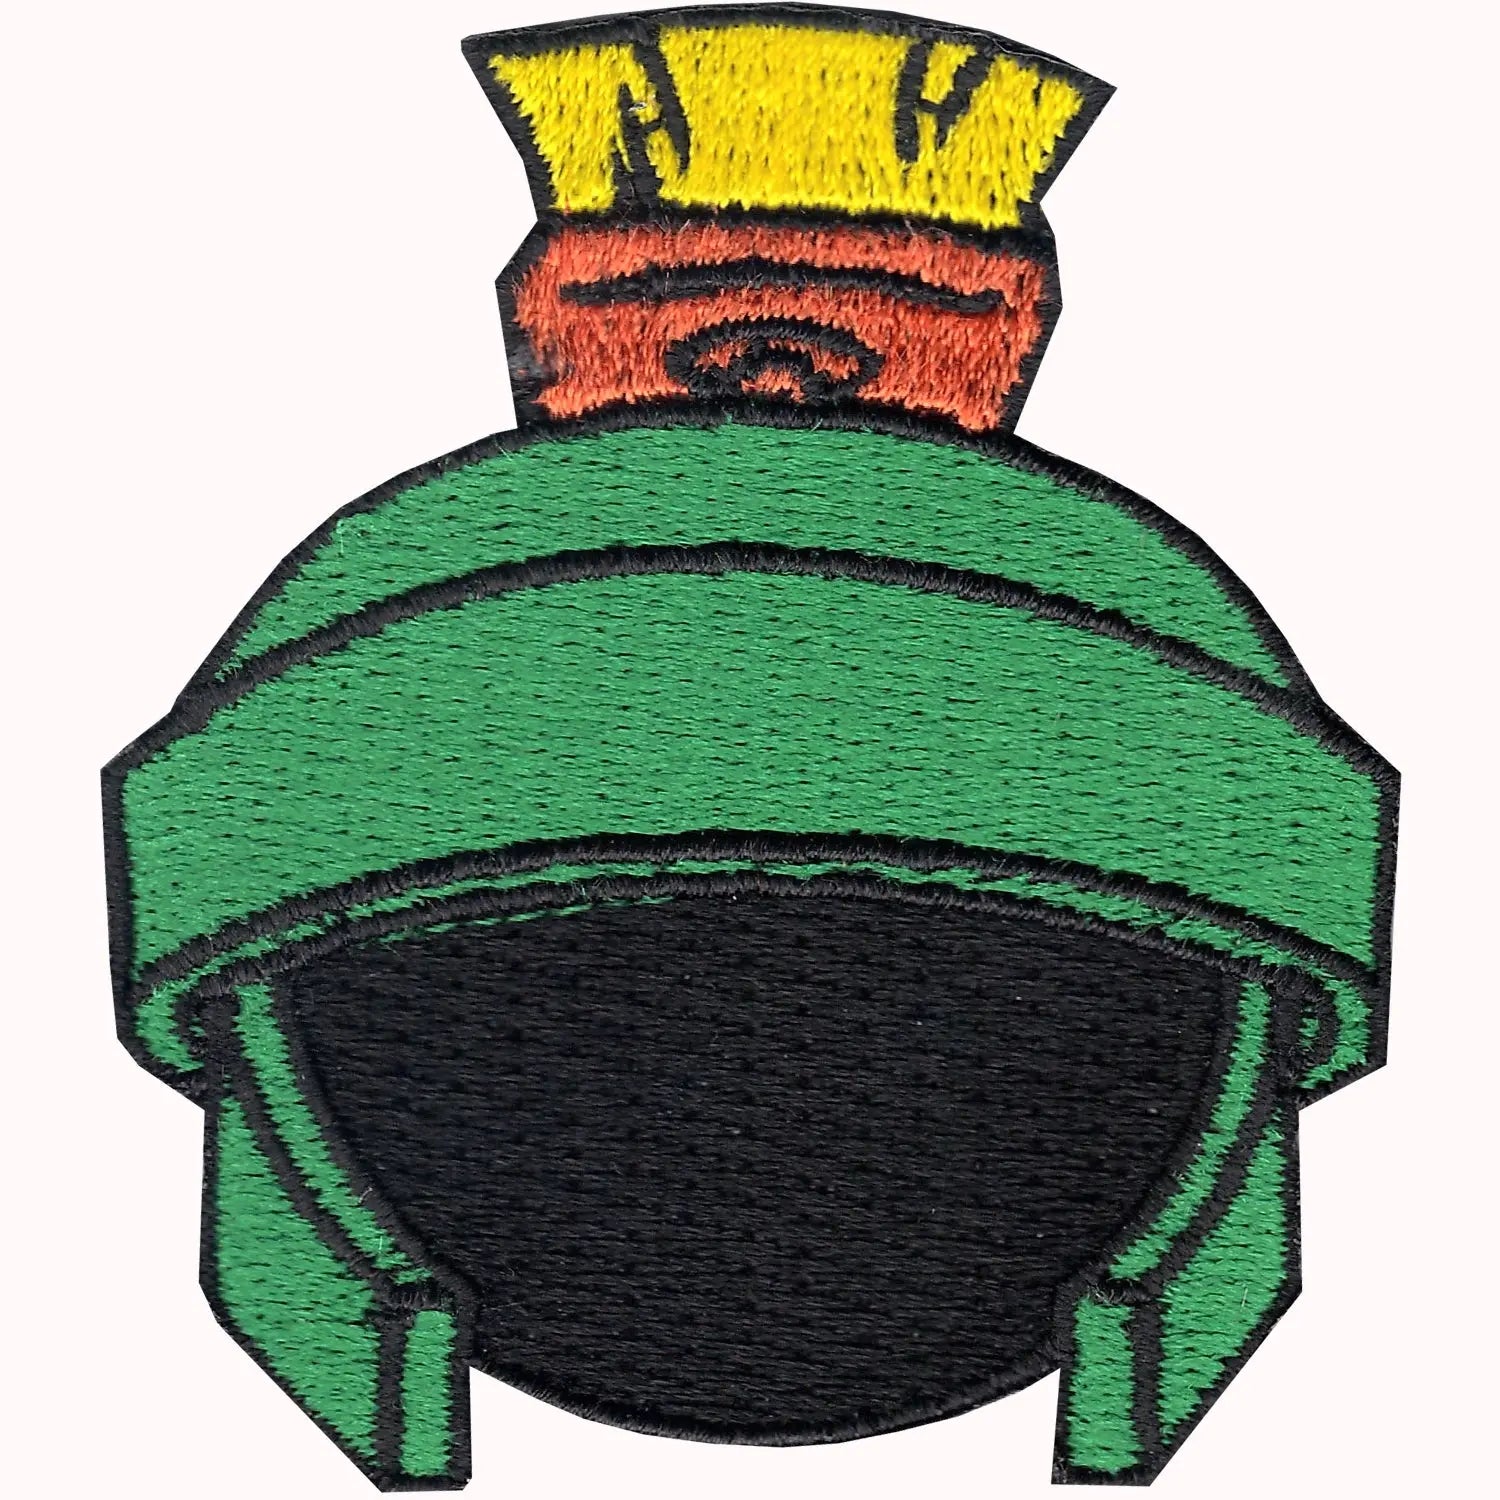 The Martian Helmet Iron On Embroidered Patch 